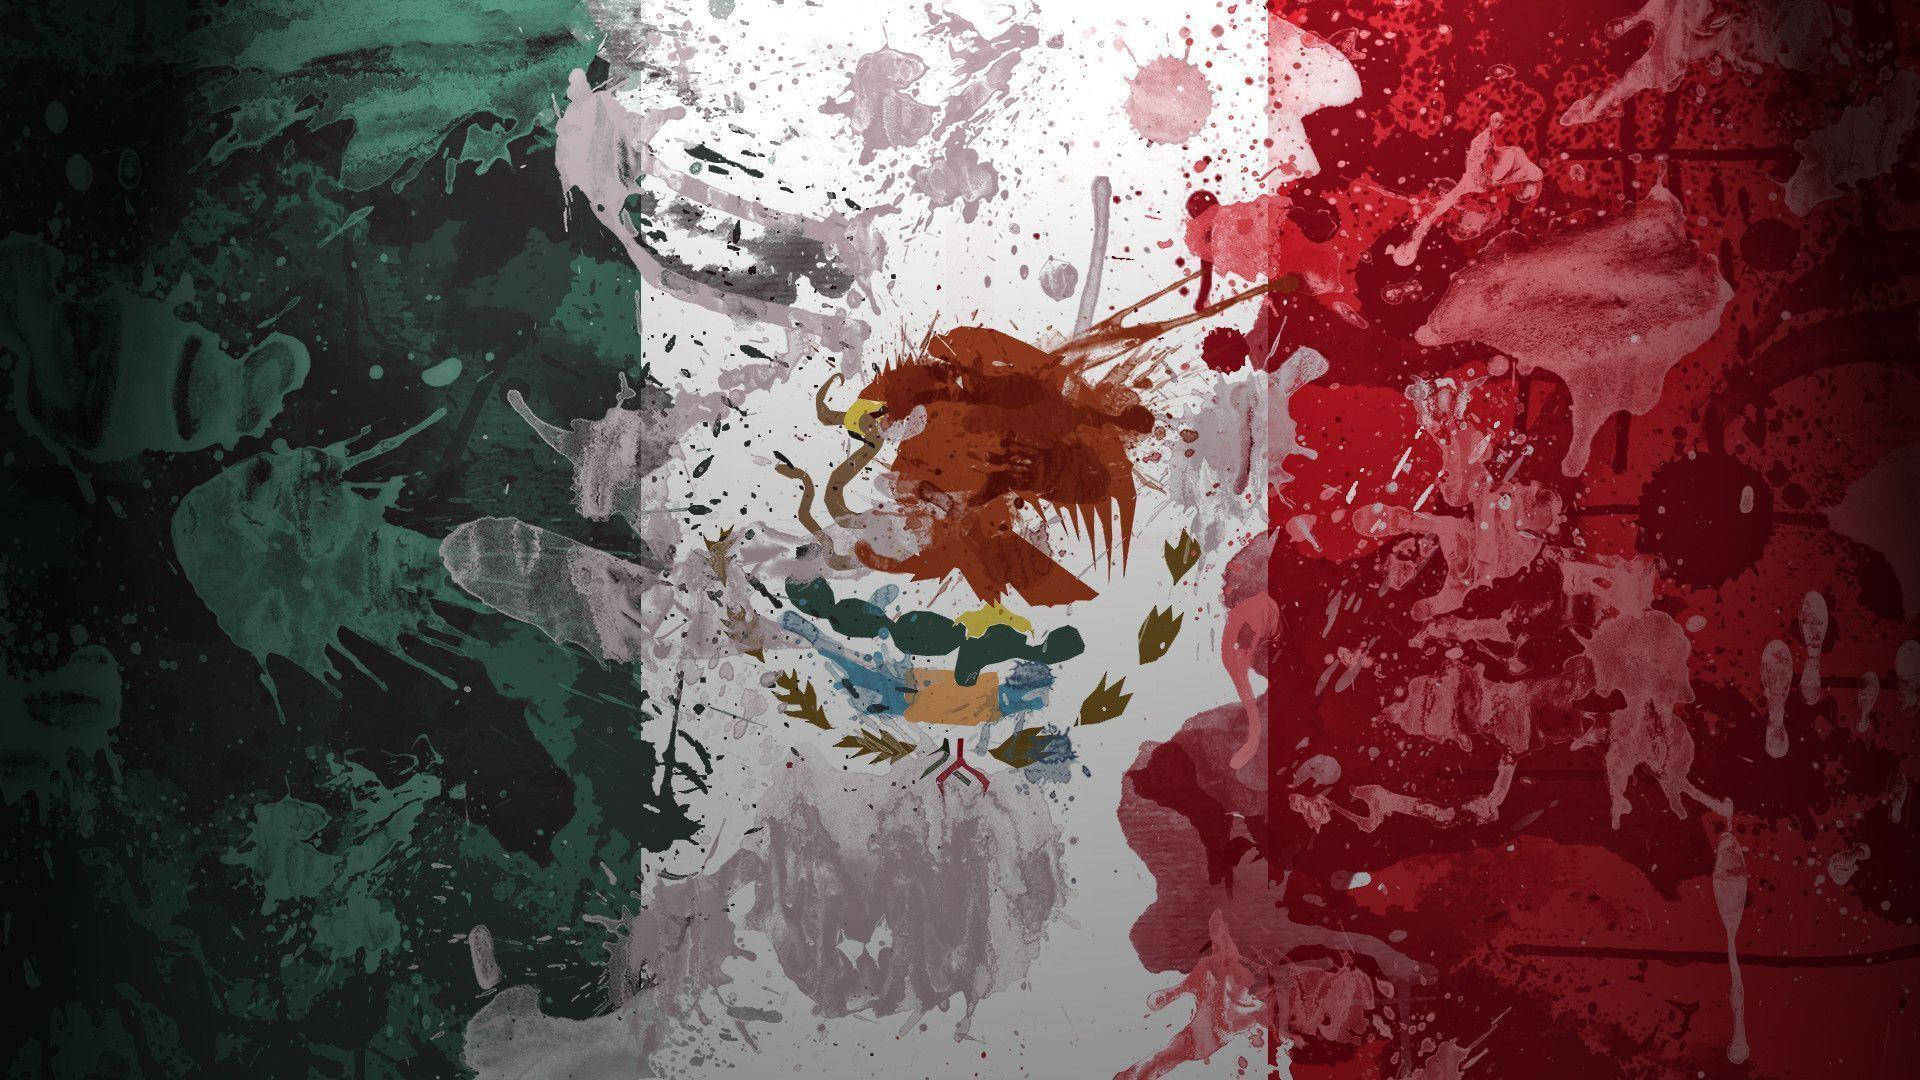 MEXICAN 1080P 2K 4K 5K HD wallpapers free download  Wallpaper Flare